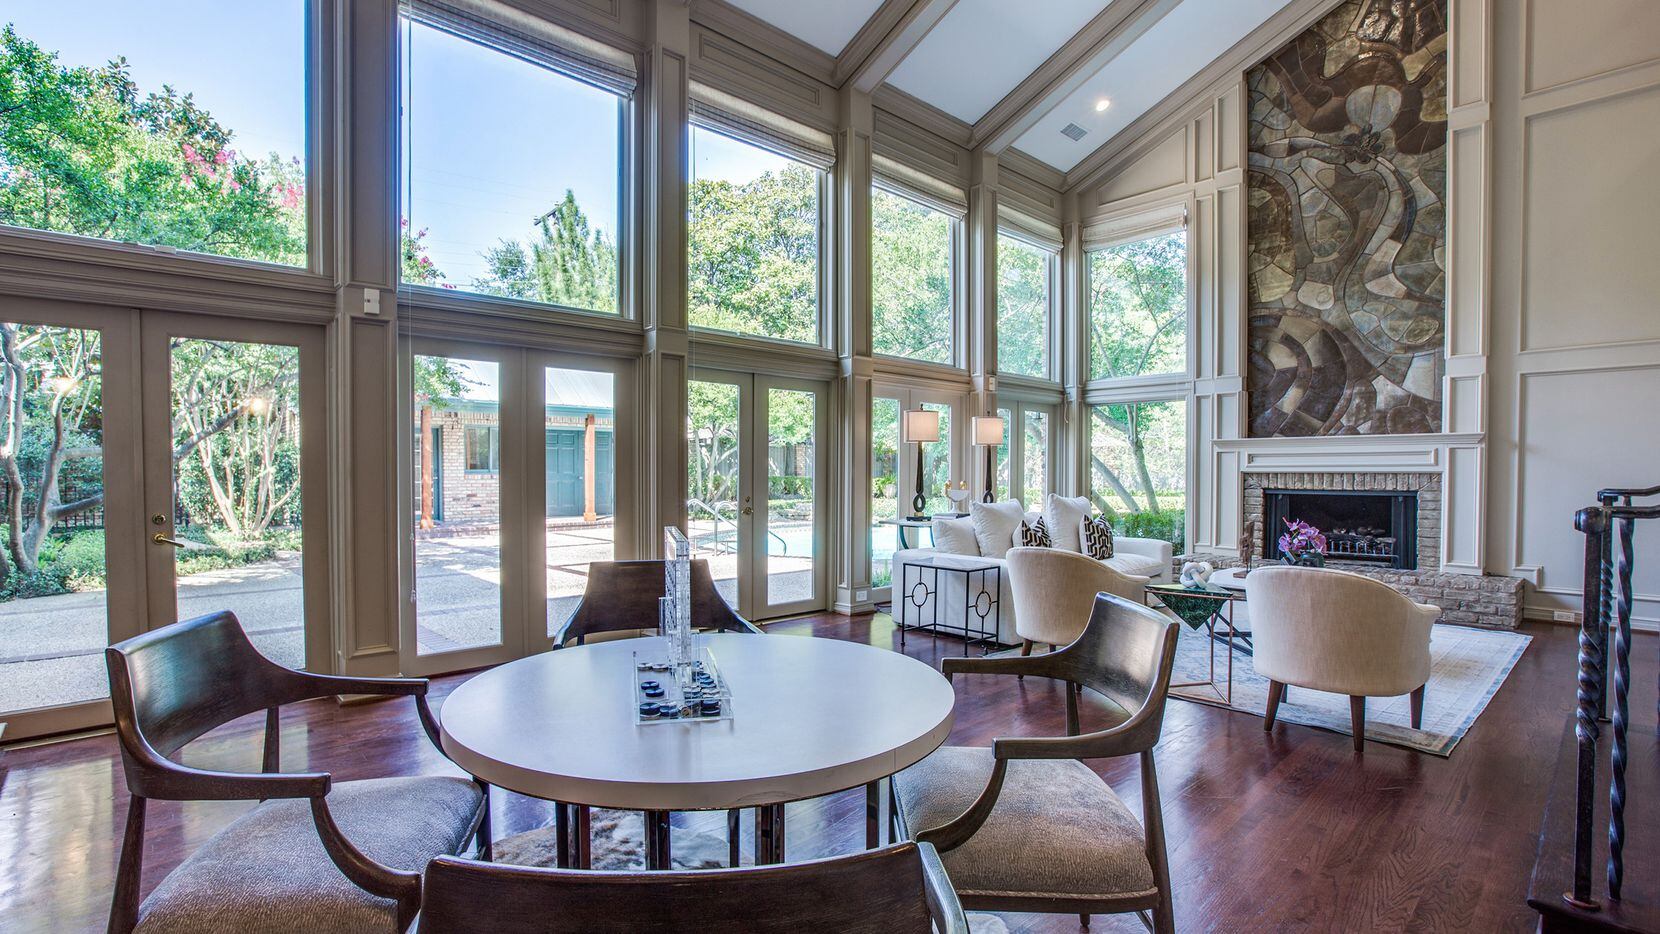 The great room in the 4,957-square-foot (per appraiser) home at 4524 Rheims Place overlooks...